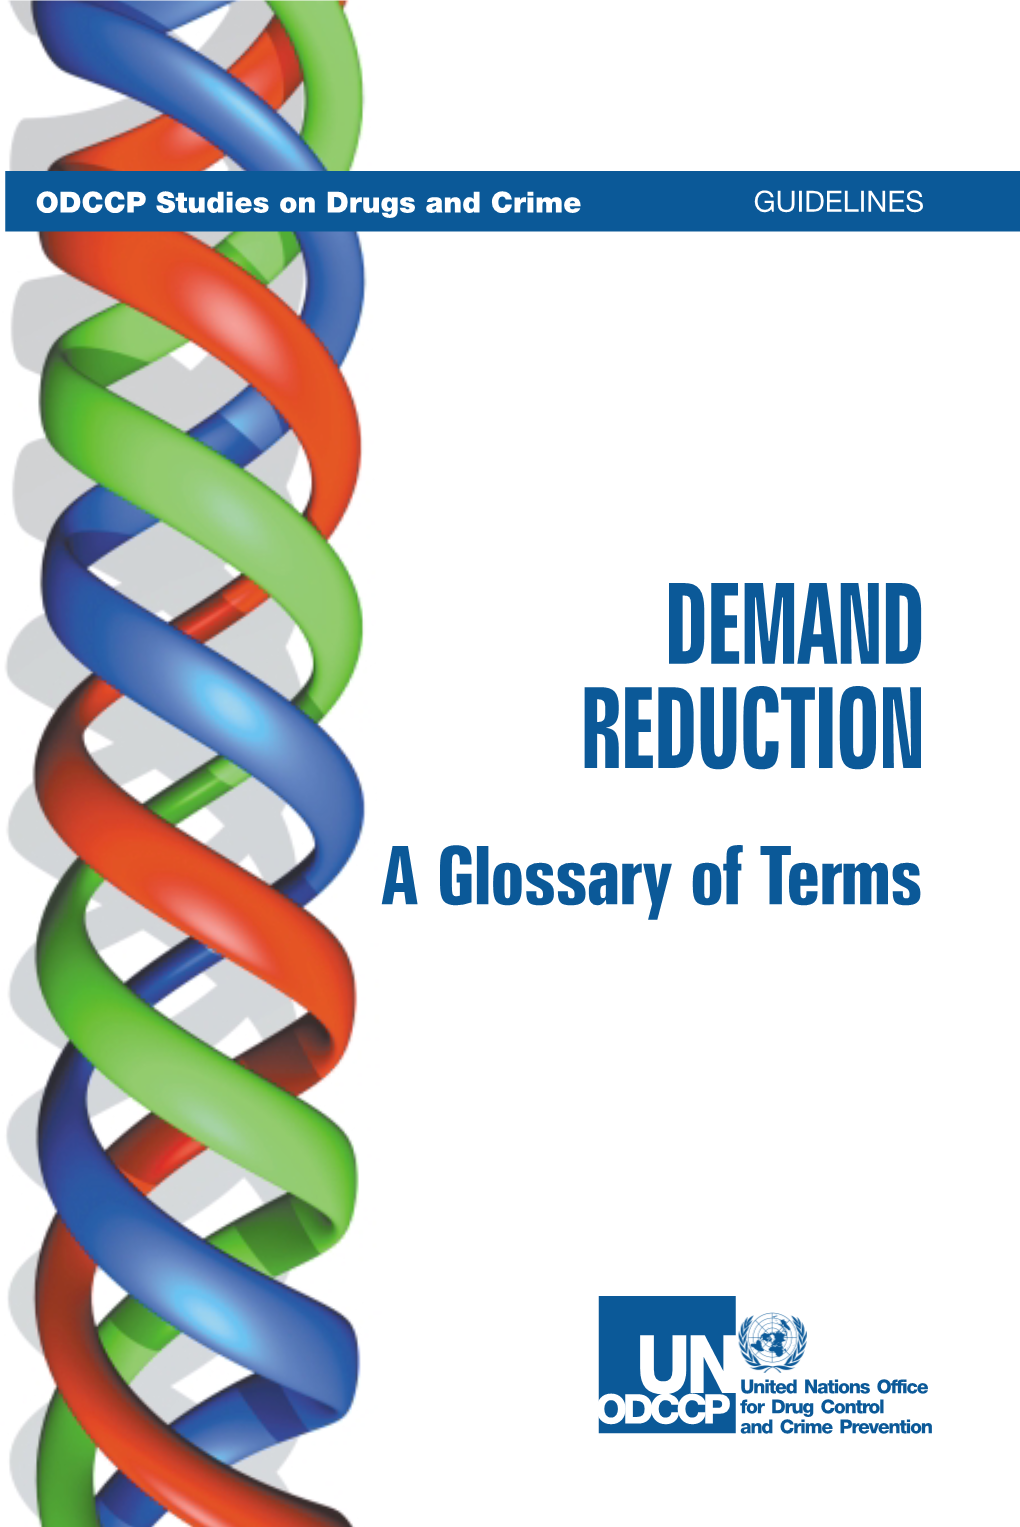 DEMAND REDUCTION a Glossary of Terms